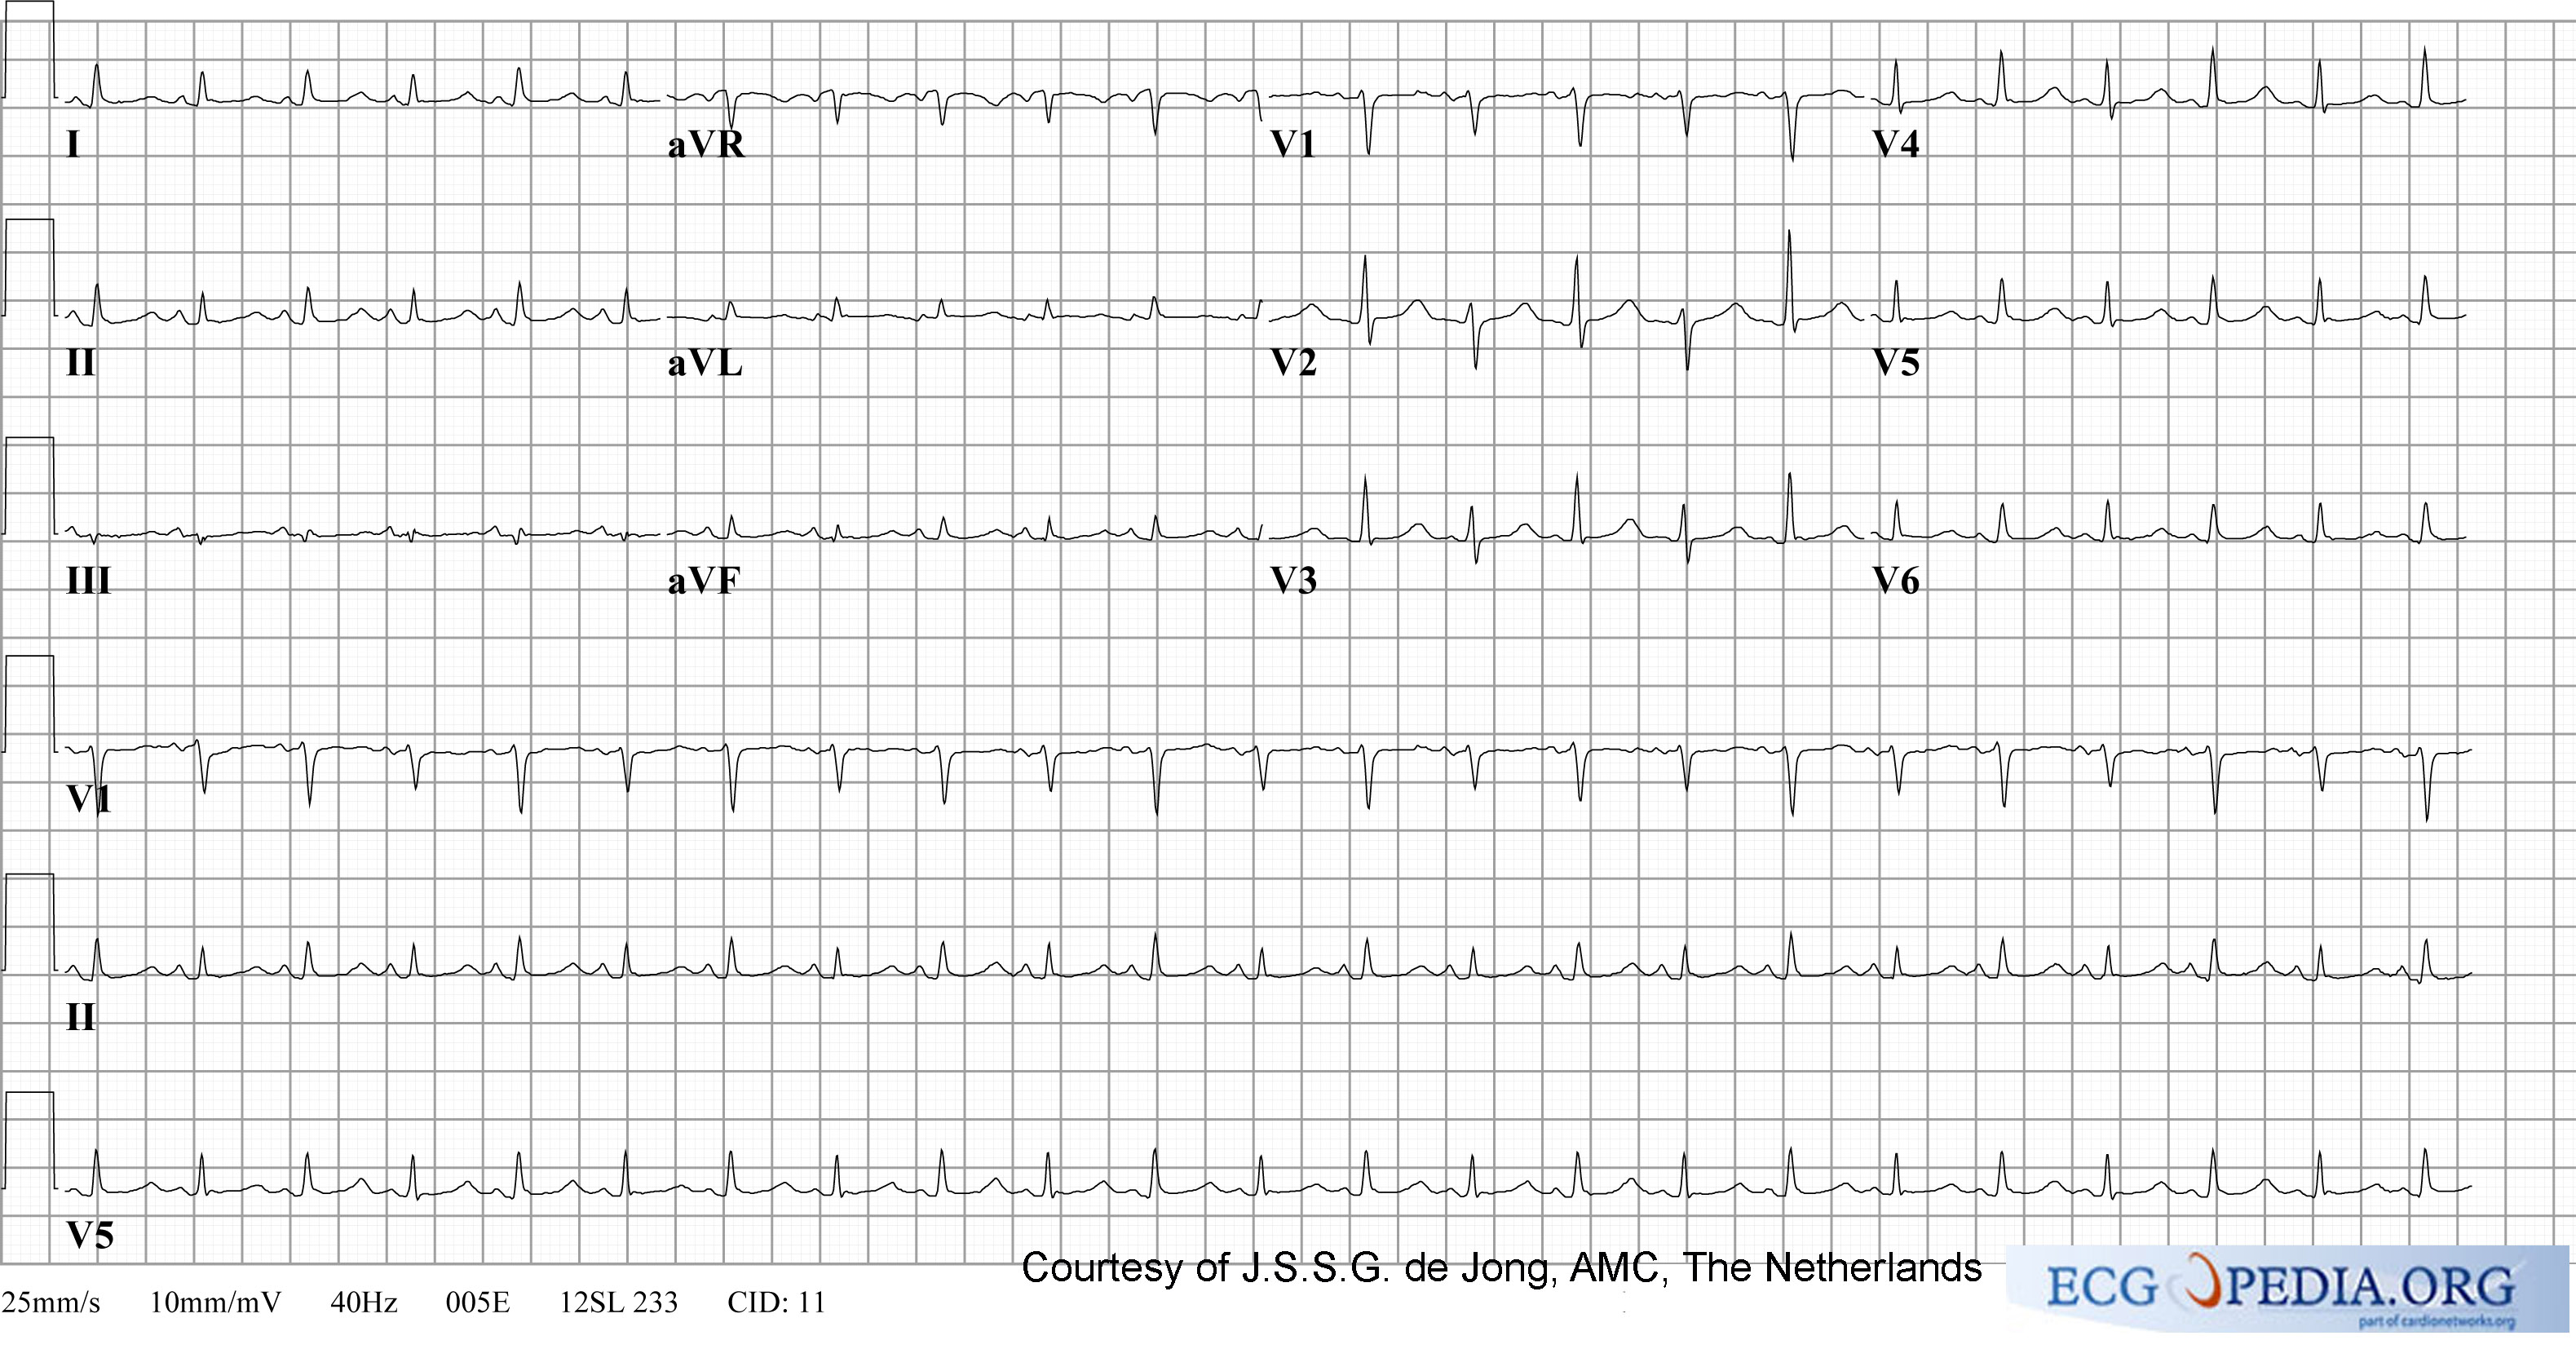 The above EKG shows low voltage QRS complexes and electrical alternans